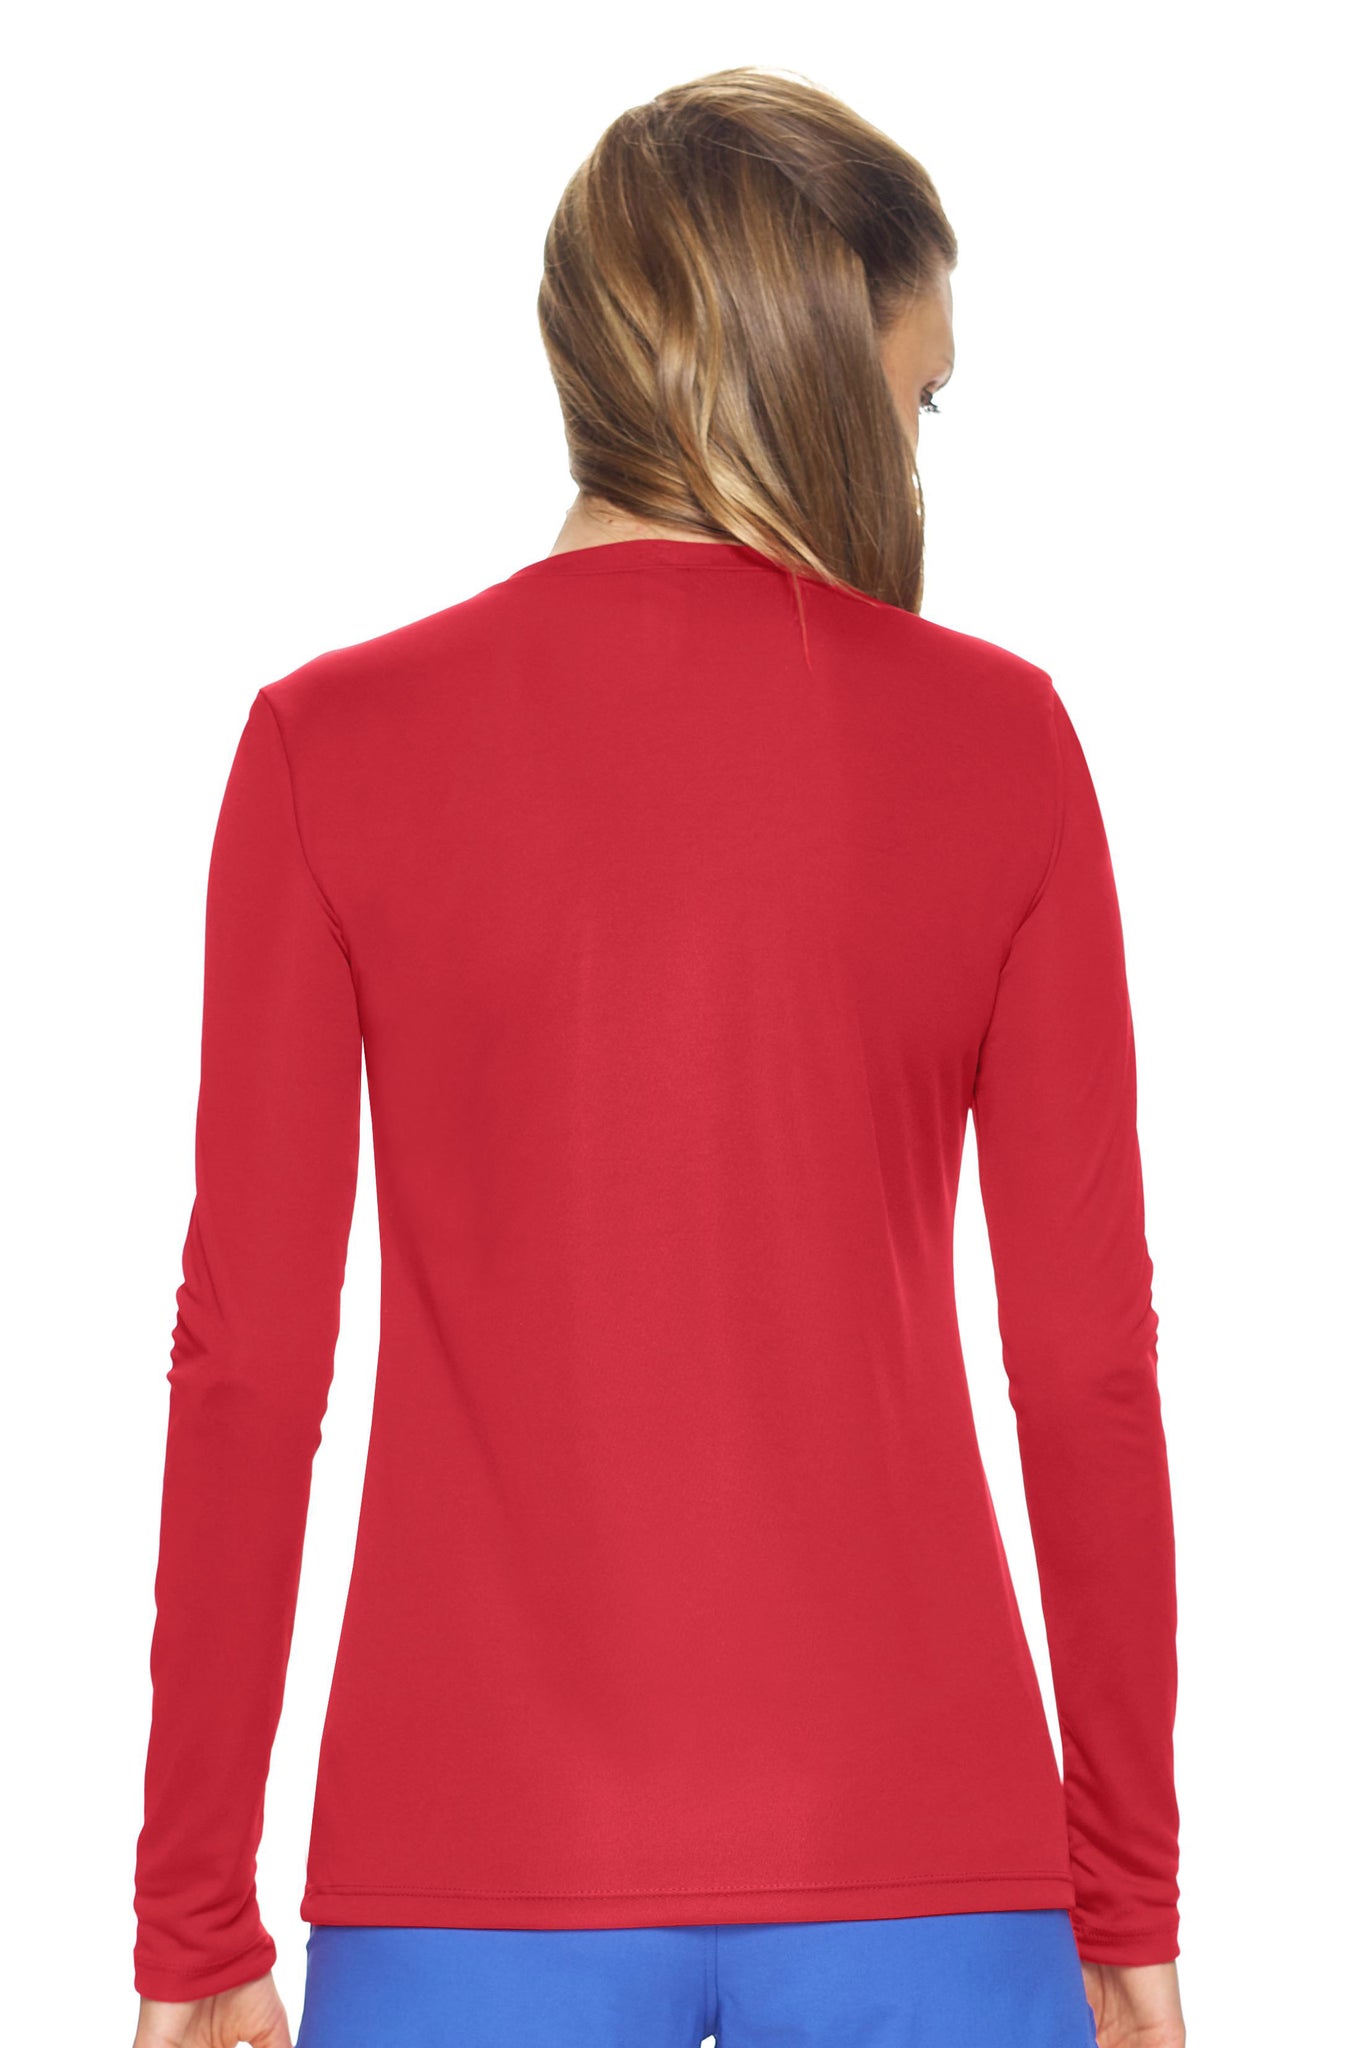 AI302🇺🇸 DriMax™ V-Neck Long Sleeve Tee - Expert Brand #RED